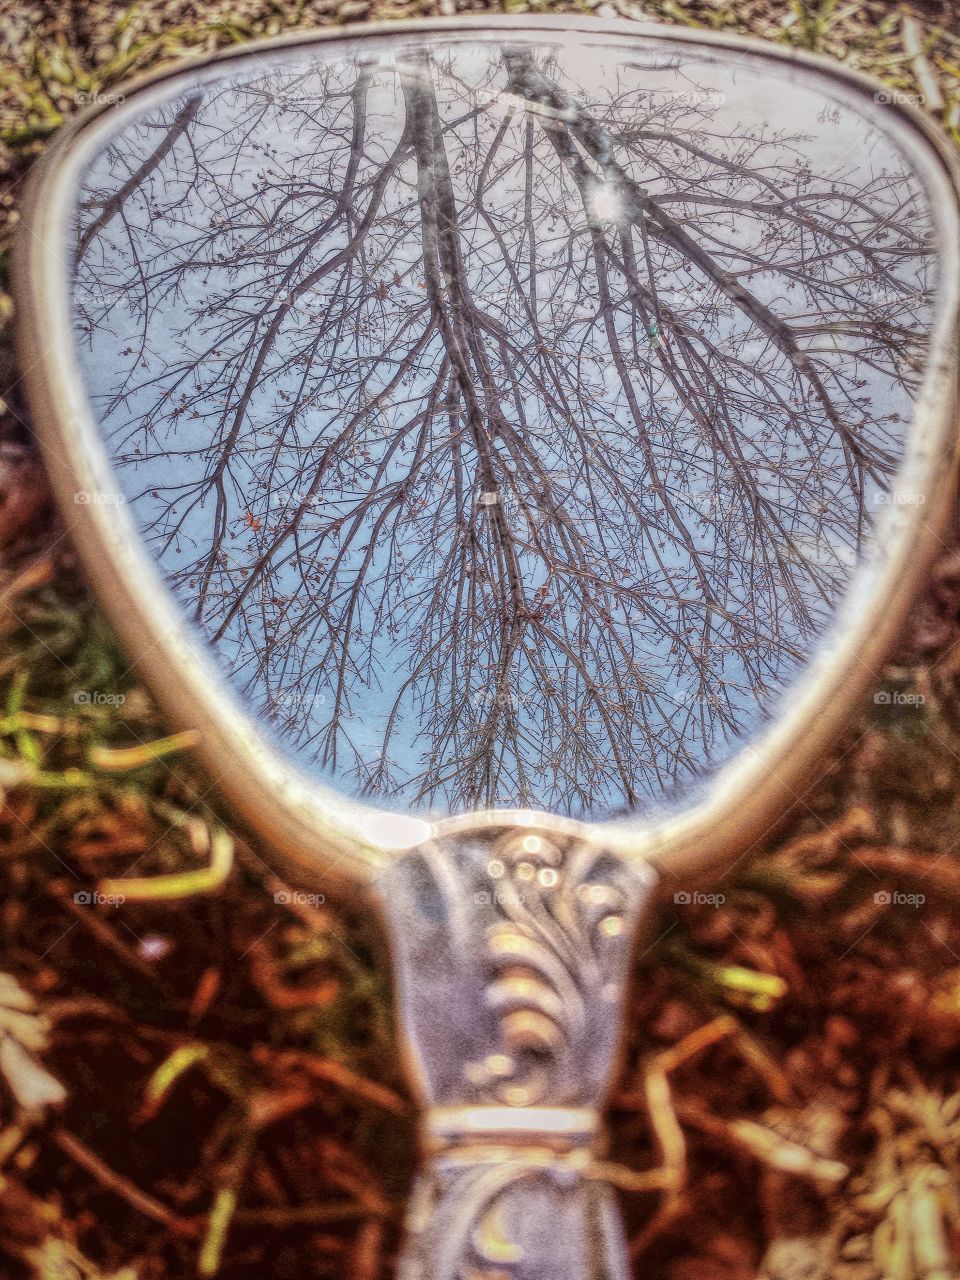 Vintage Hand Mirror Reflects Nature